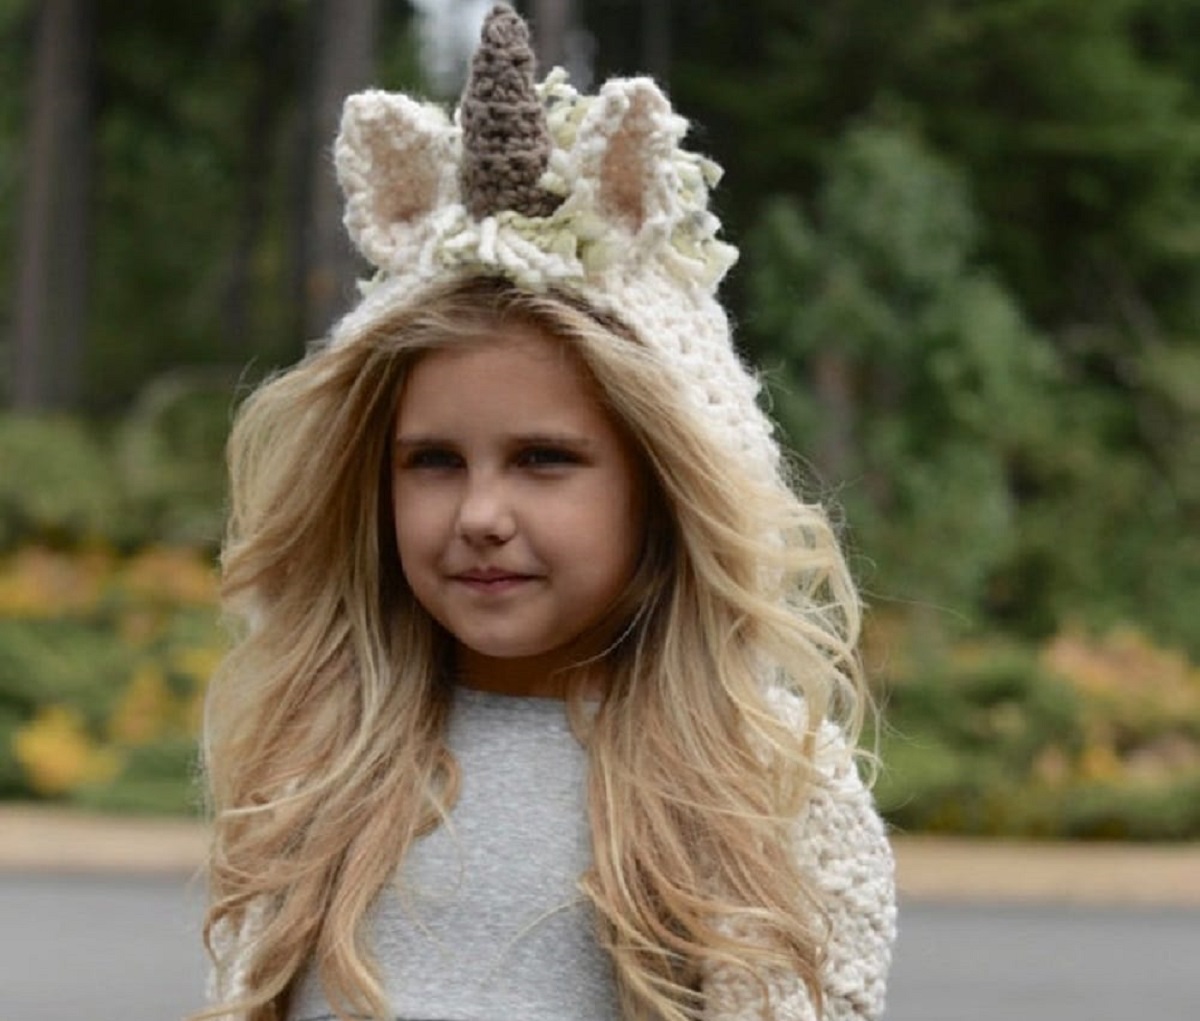 A blonde child outside wearing a unicorn hooded scarf with a grey horn in the center.